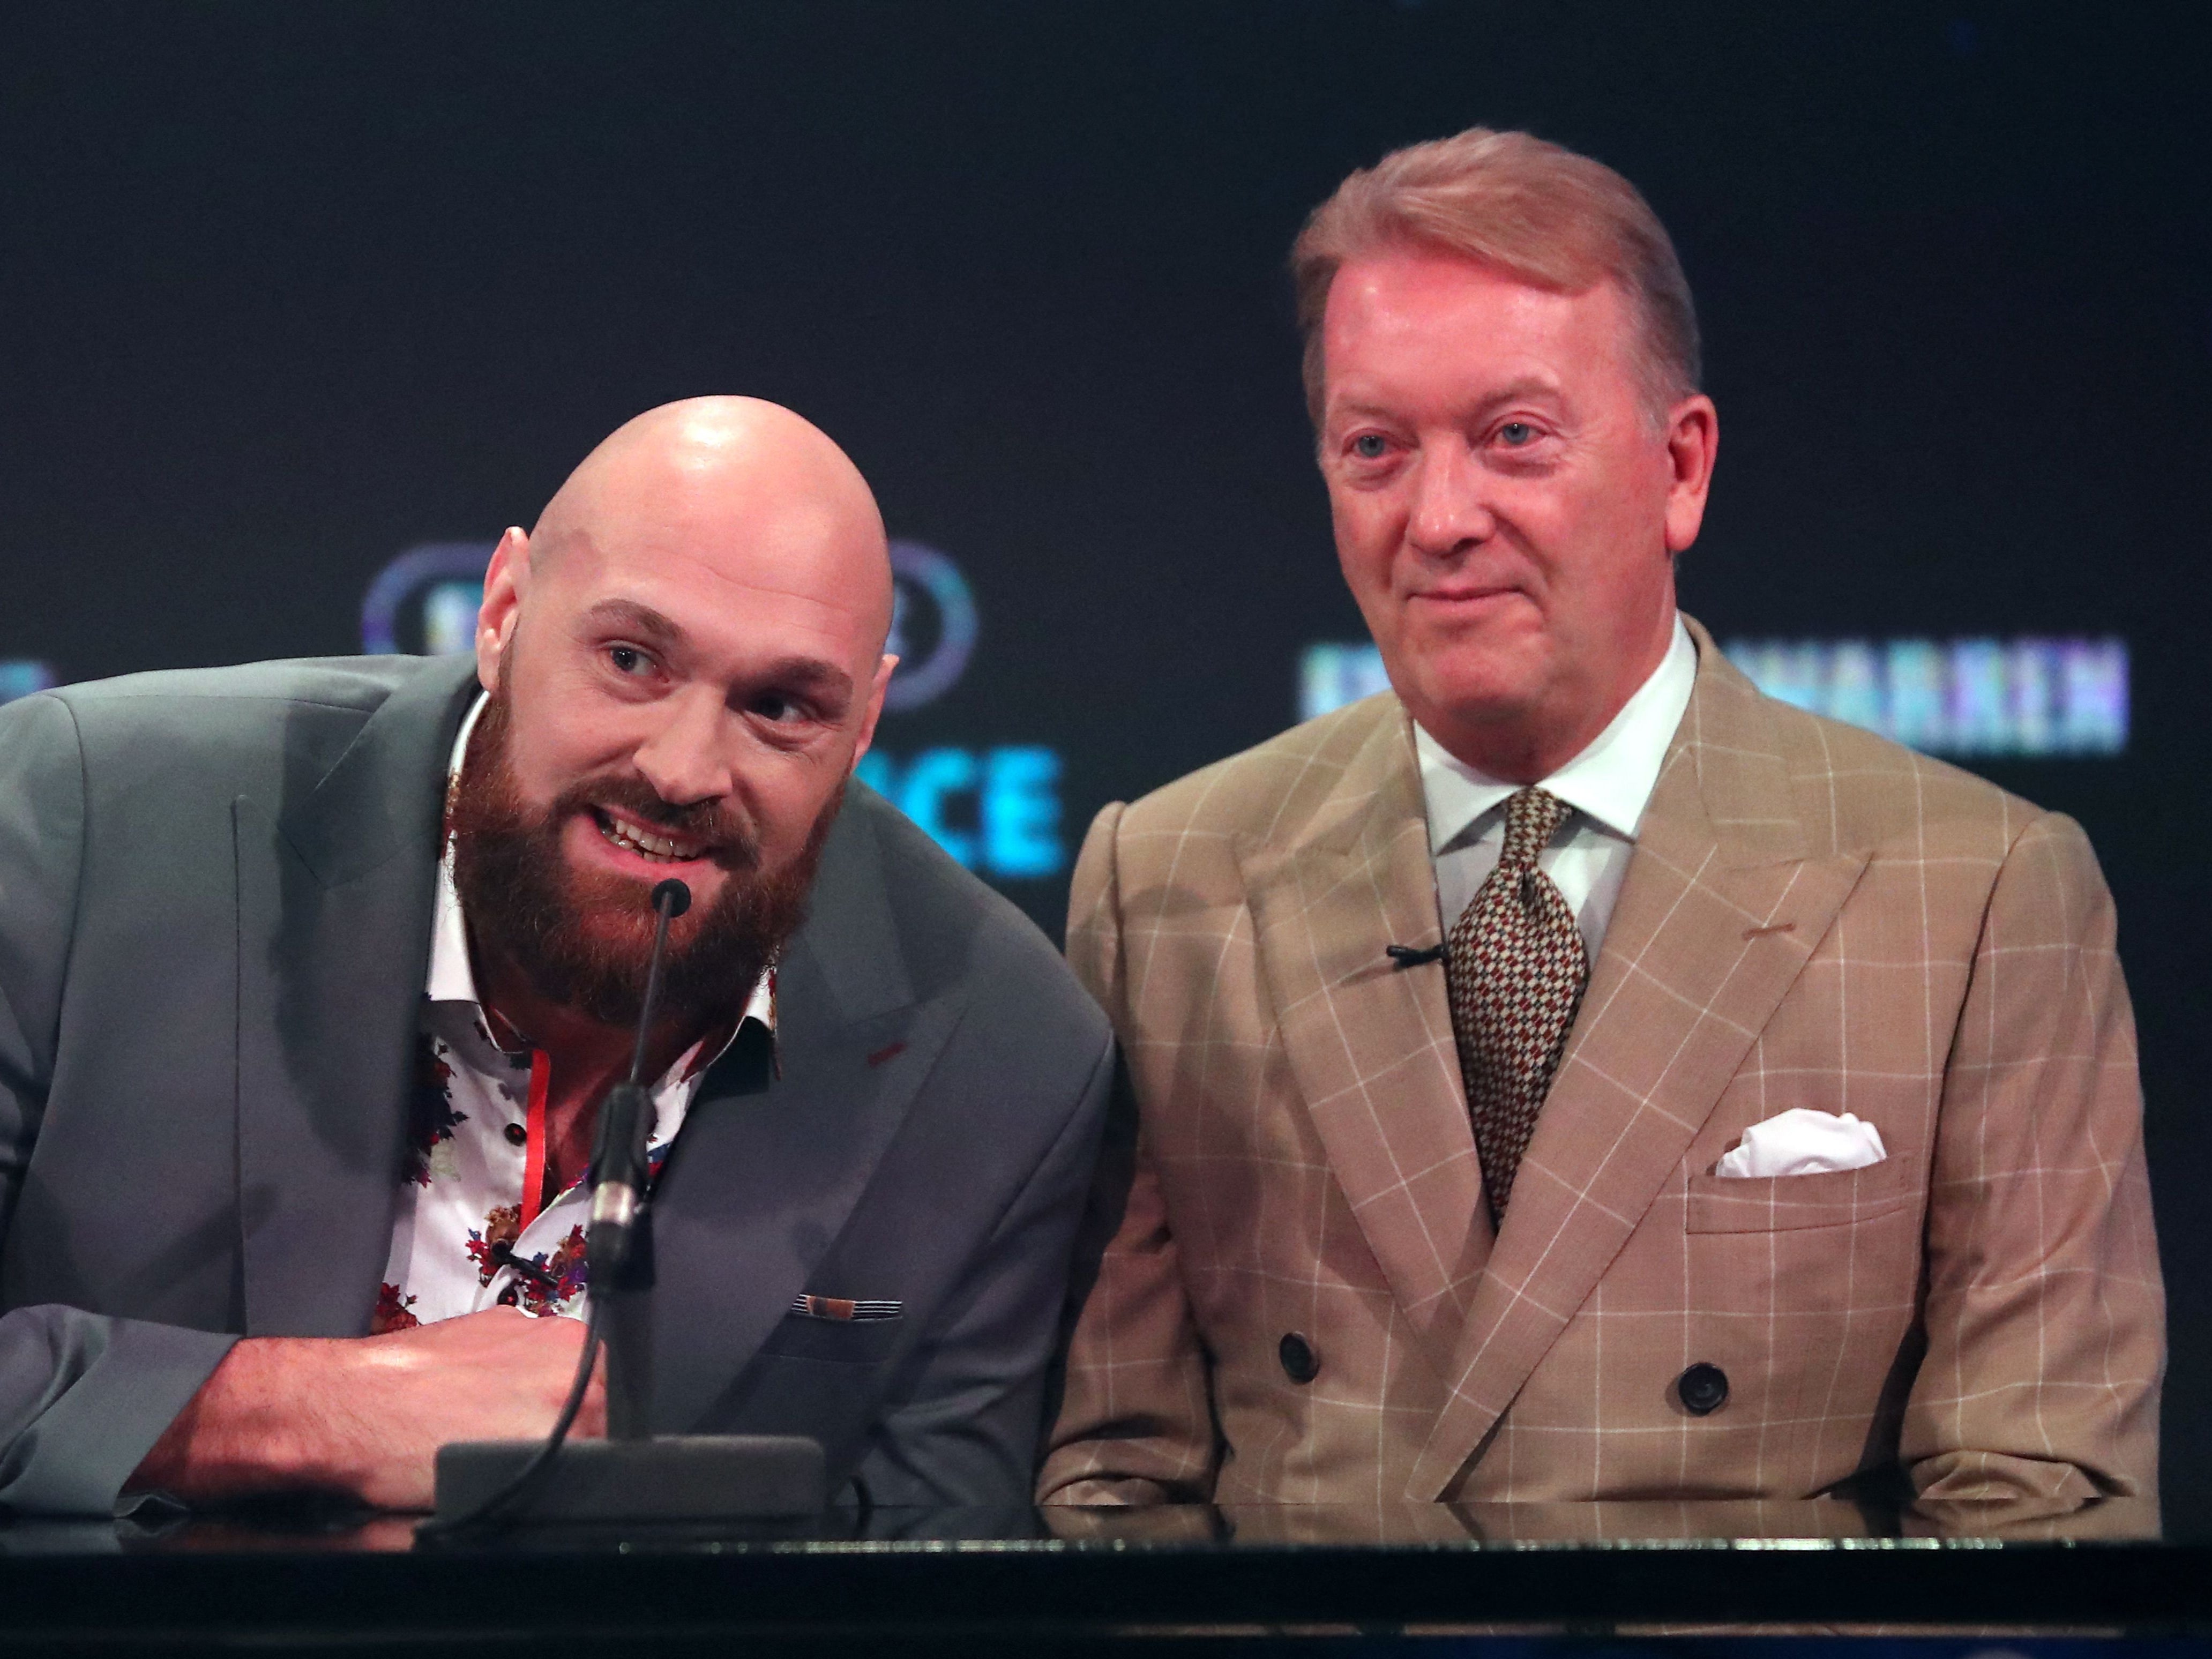 Frank Warren (right) does not want British judges deciding the fight between Tyson Fury (left) and Dillian Whyte